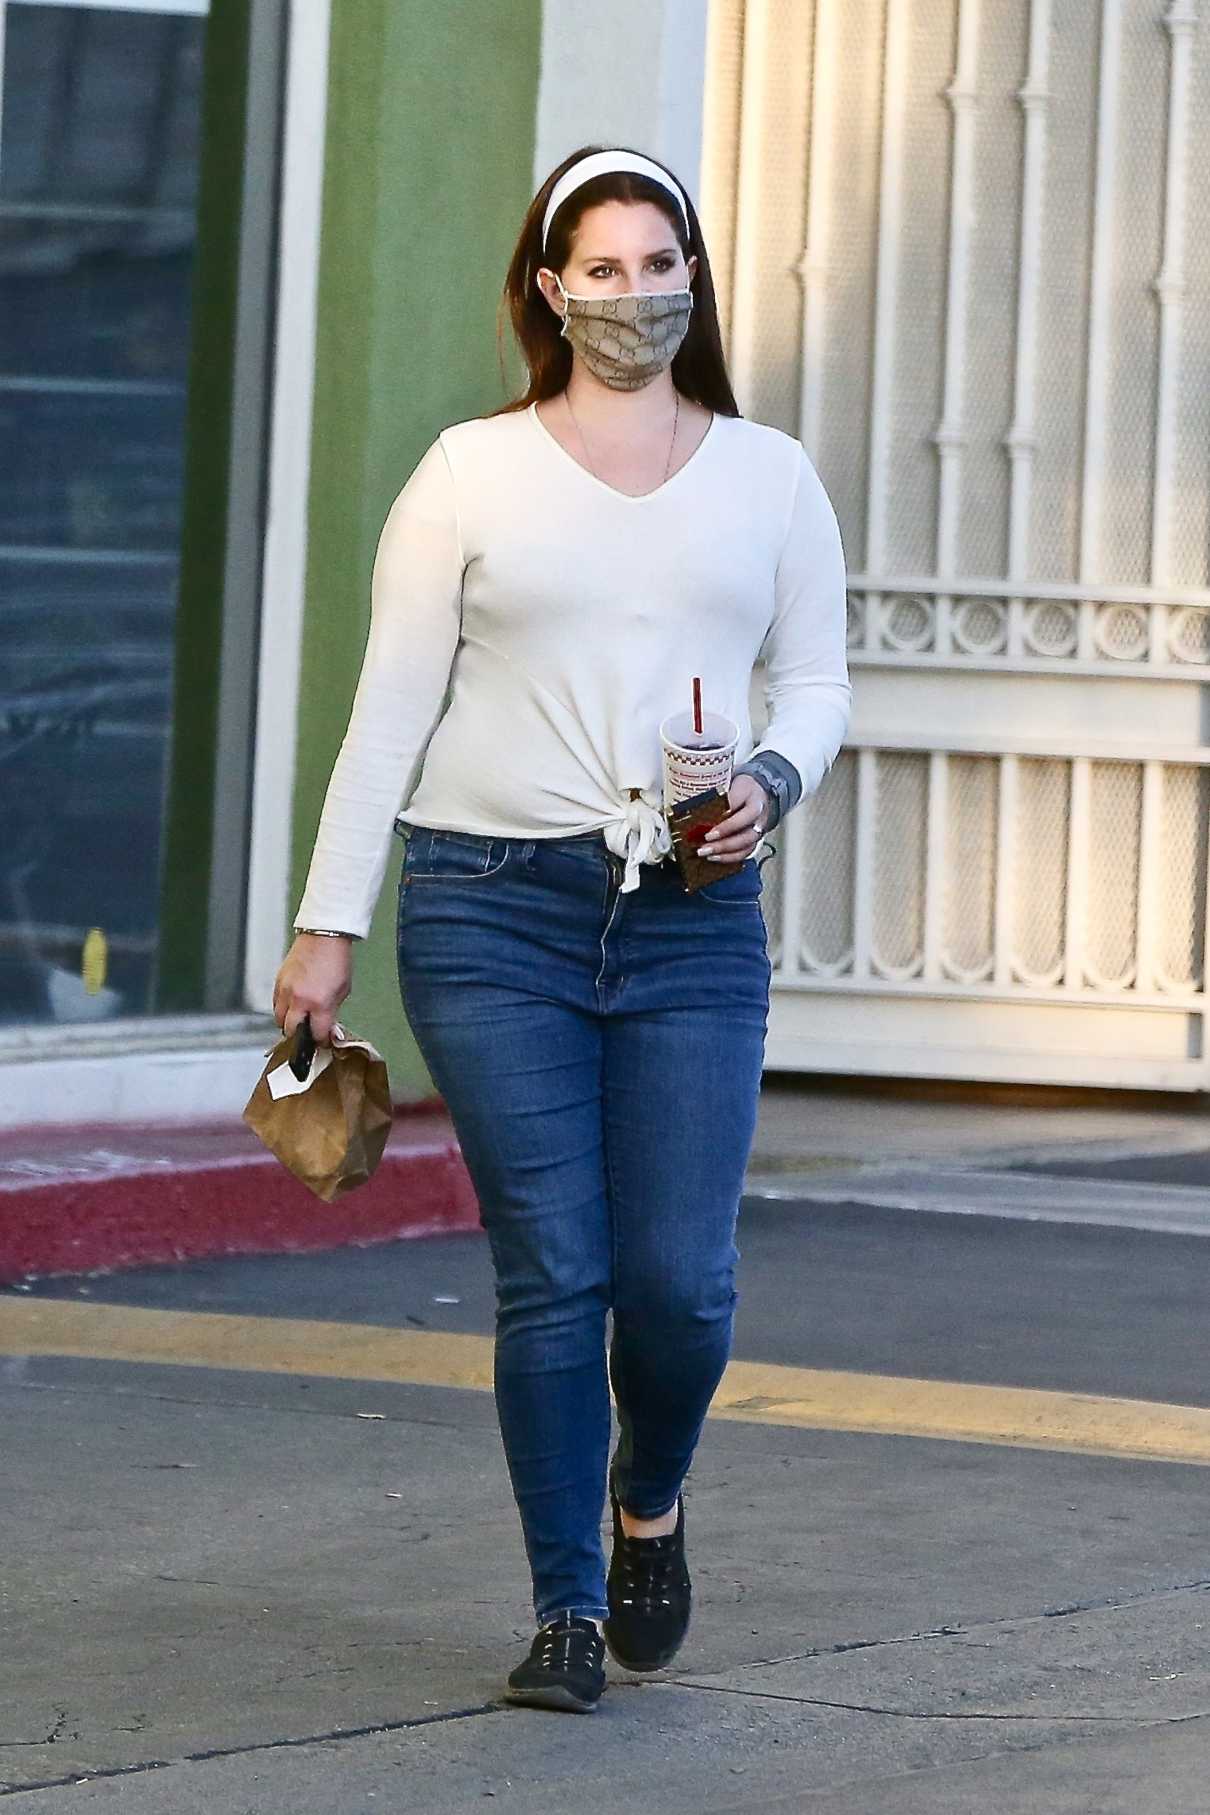 Lana Del Rey in a White Long Sleeves T-Shirt